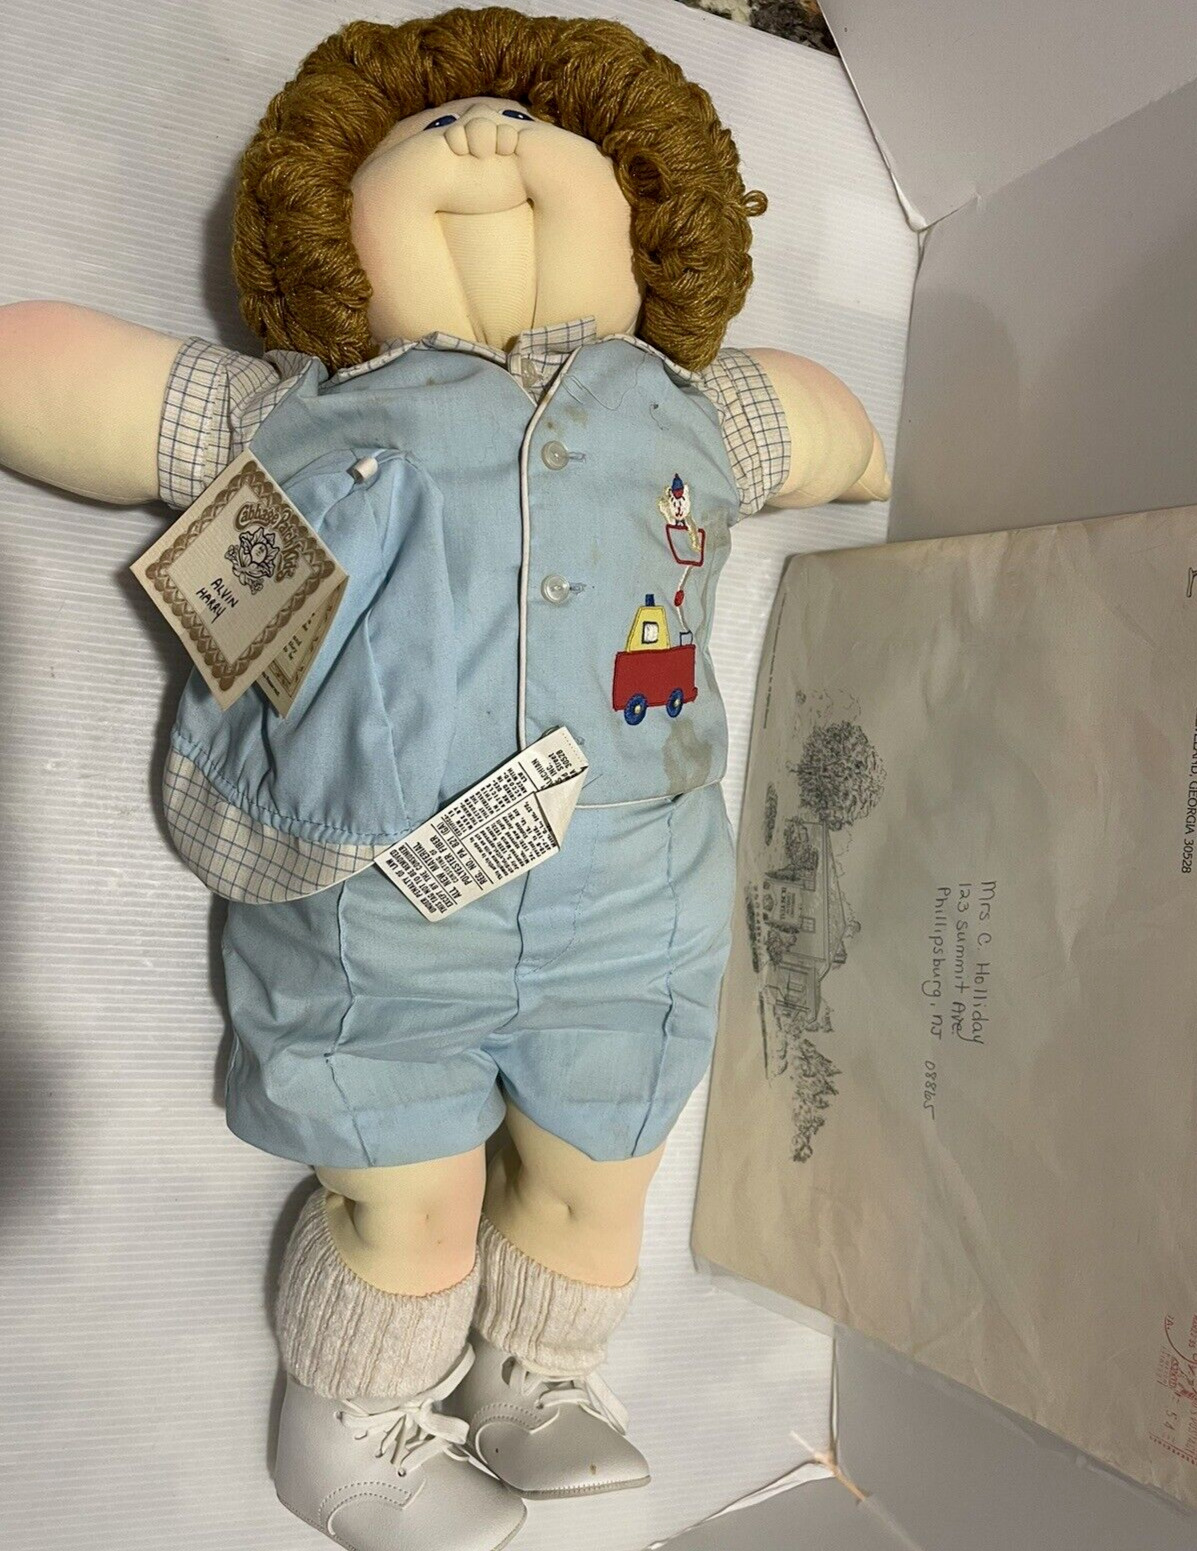 1984 The Little People  Soft Sculpture Cabbage Patch Alvin Harry